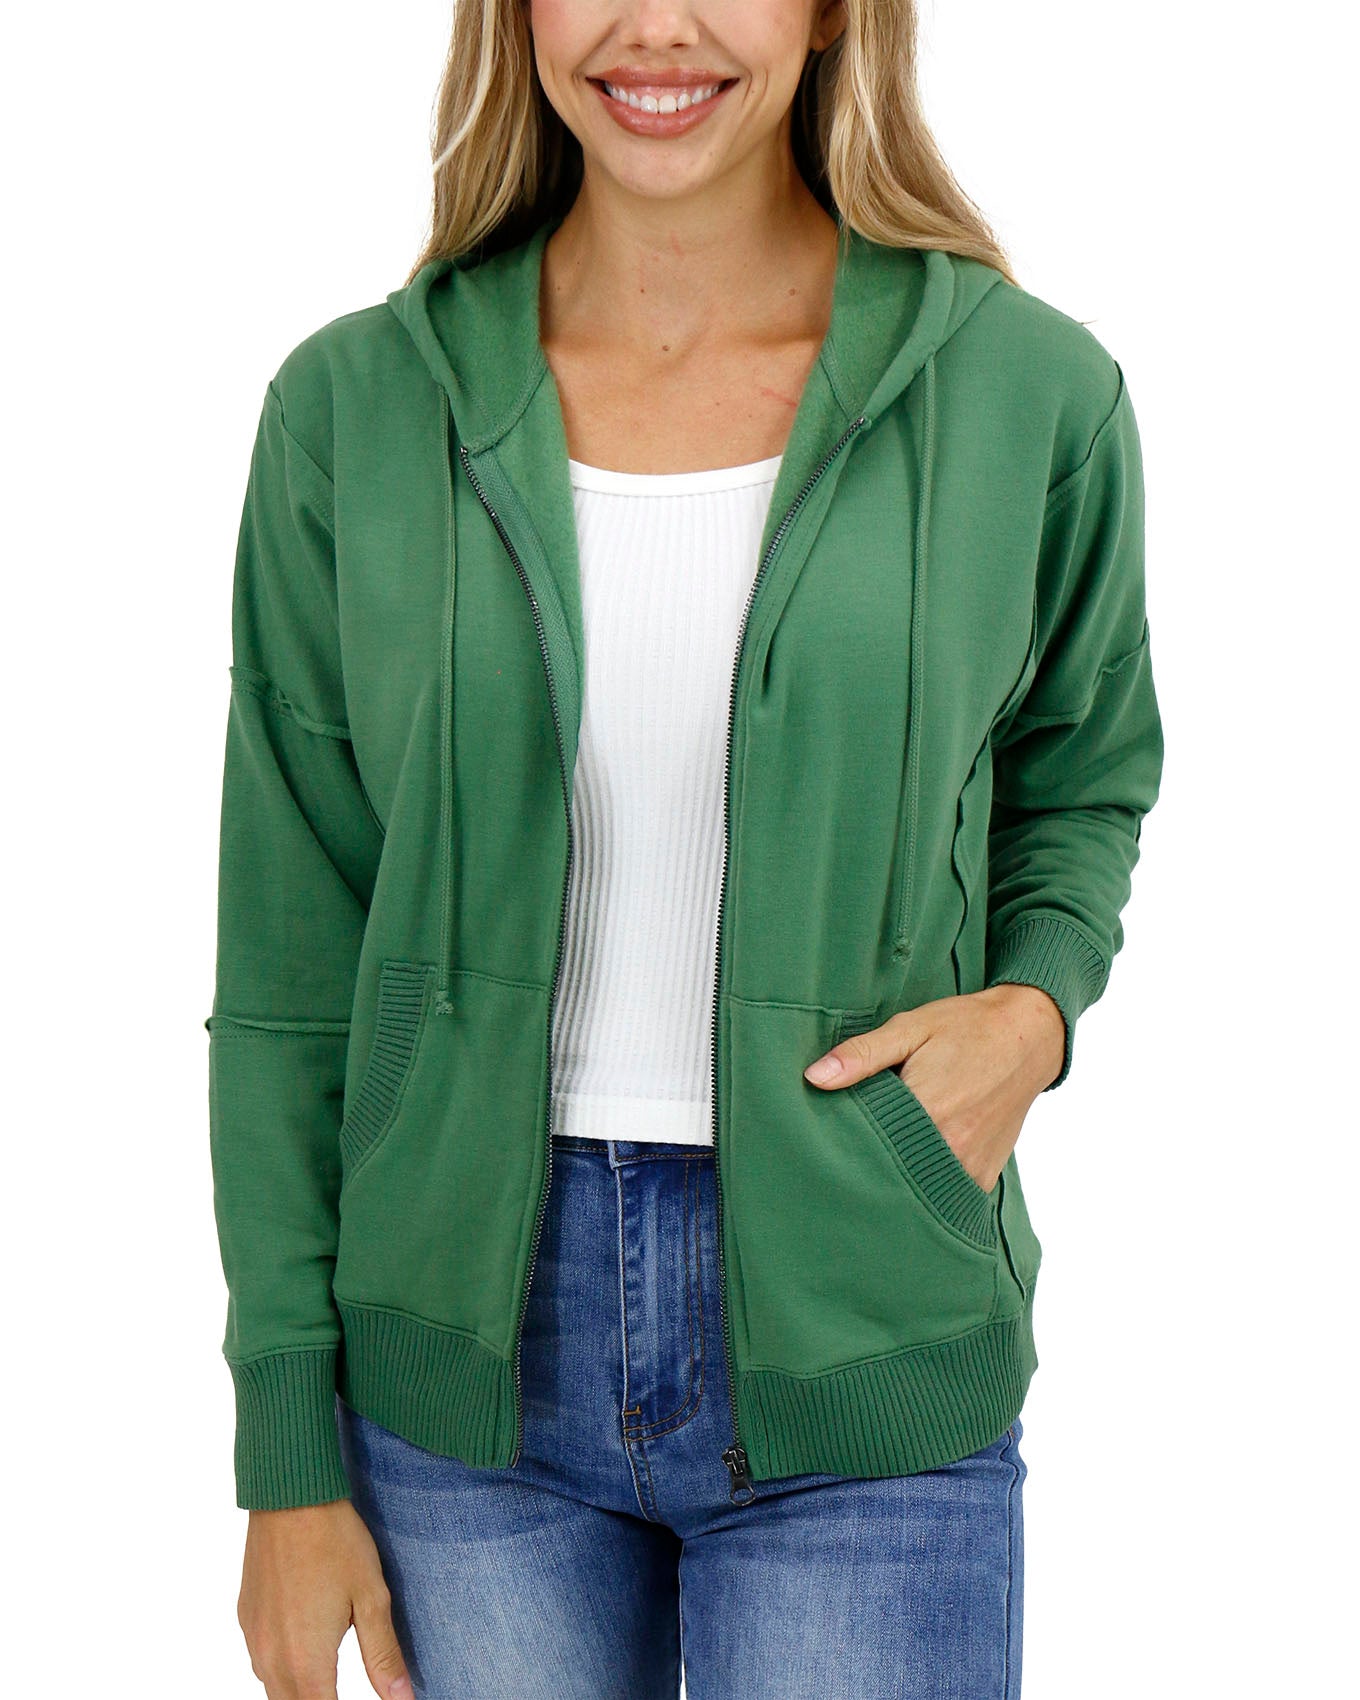 front view unzipped stock shot of hedge green zip up hoodie